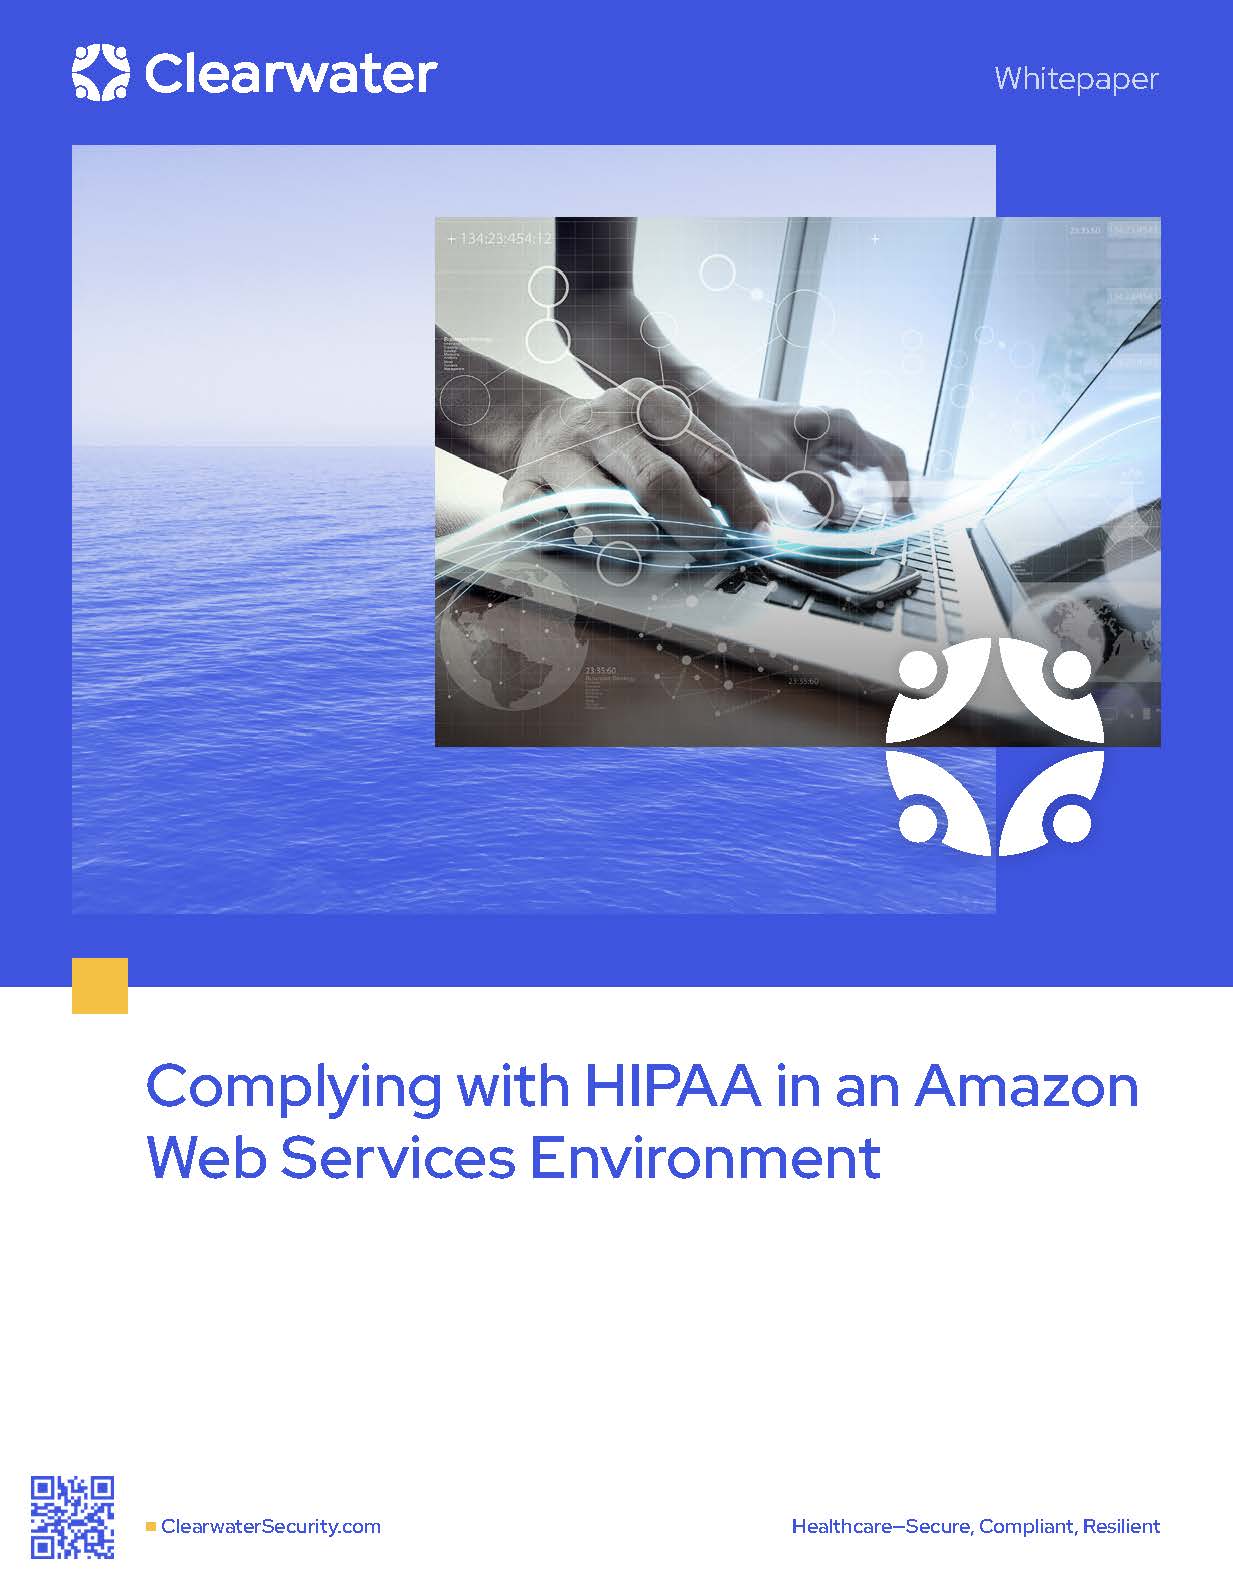 Complying with HIPAA in AWS by Clearwater